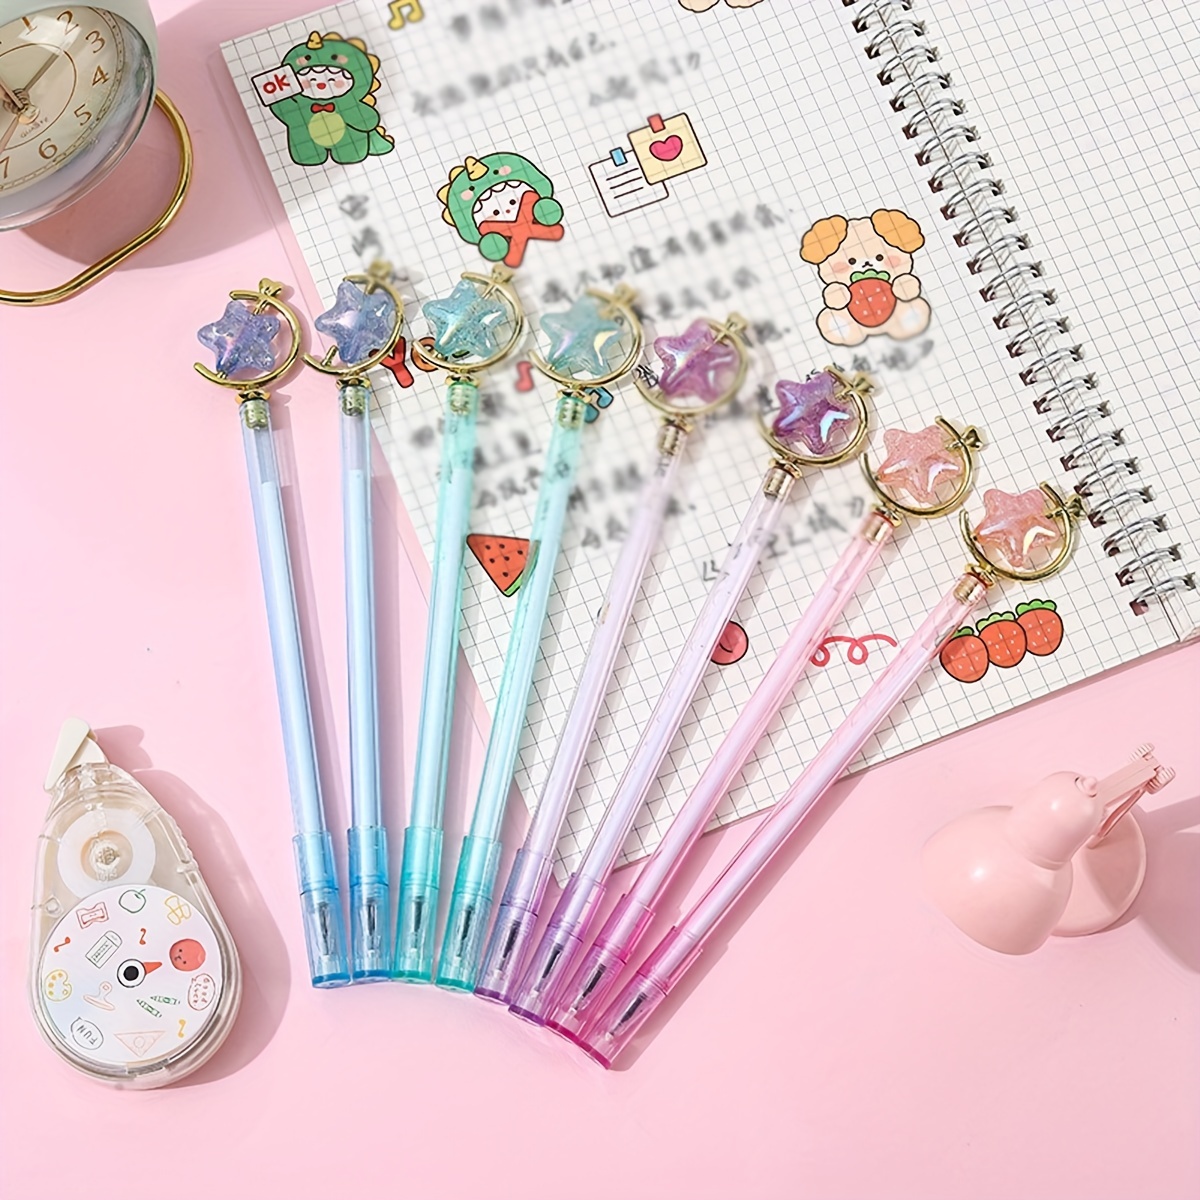 Good Night Starry Sky Gel Pens 3 Pc Cute Pen Set, Kawaii Stationery, Stars  and Sky Pen, Planner Accessories Journal Diary Pen Student Gift 